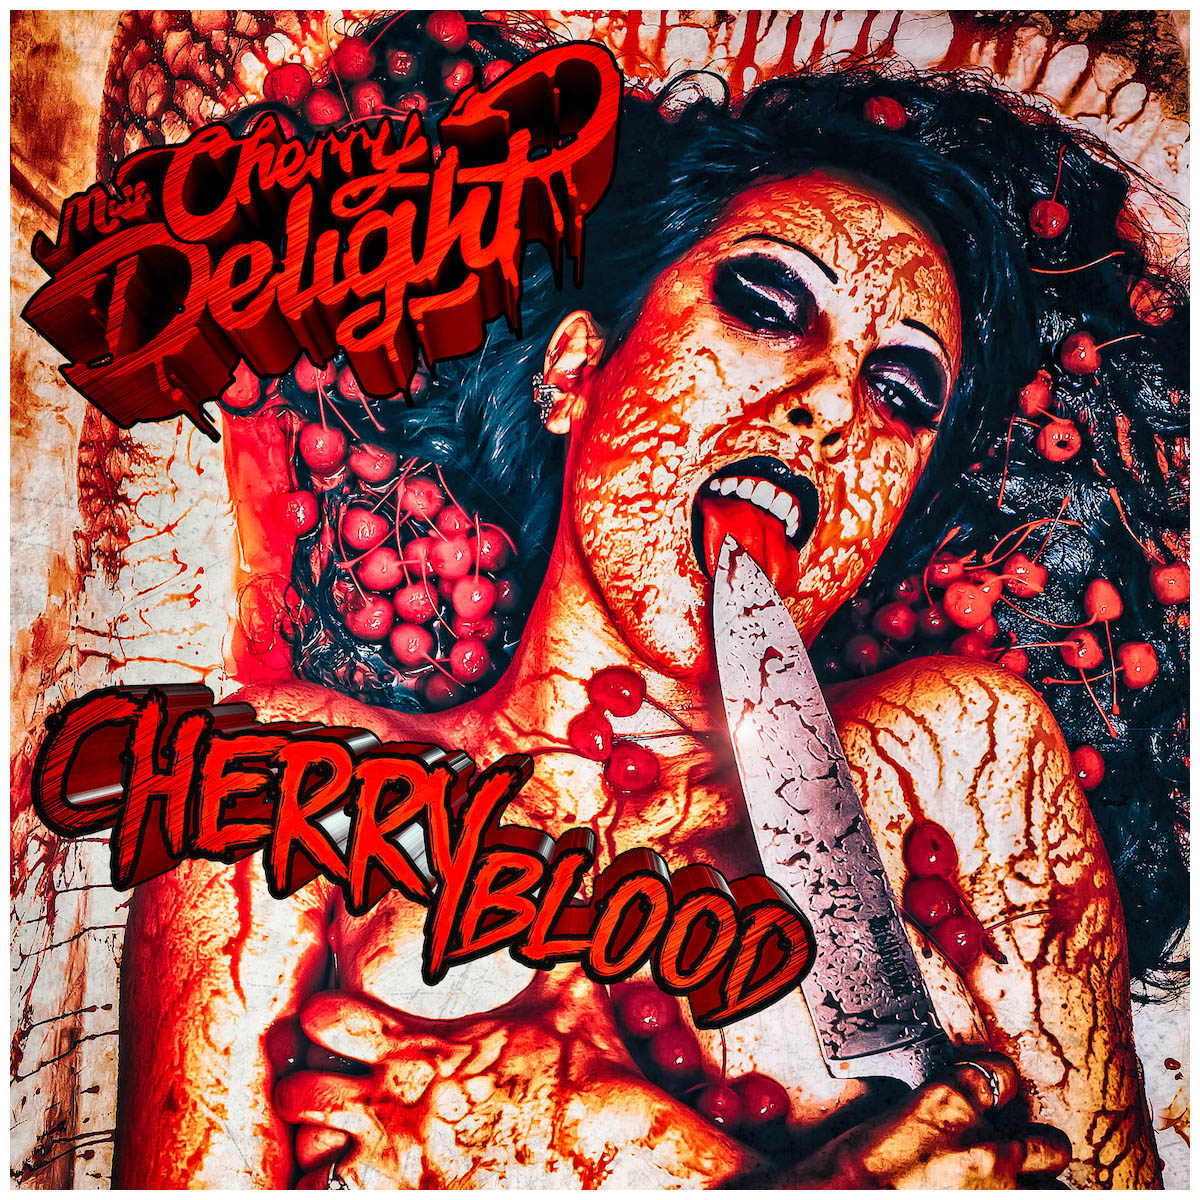 Cover of Cherry Blood